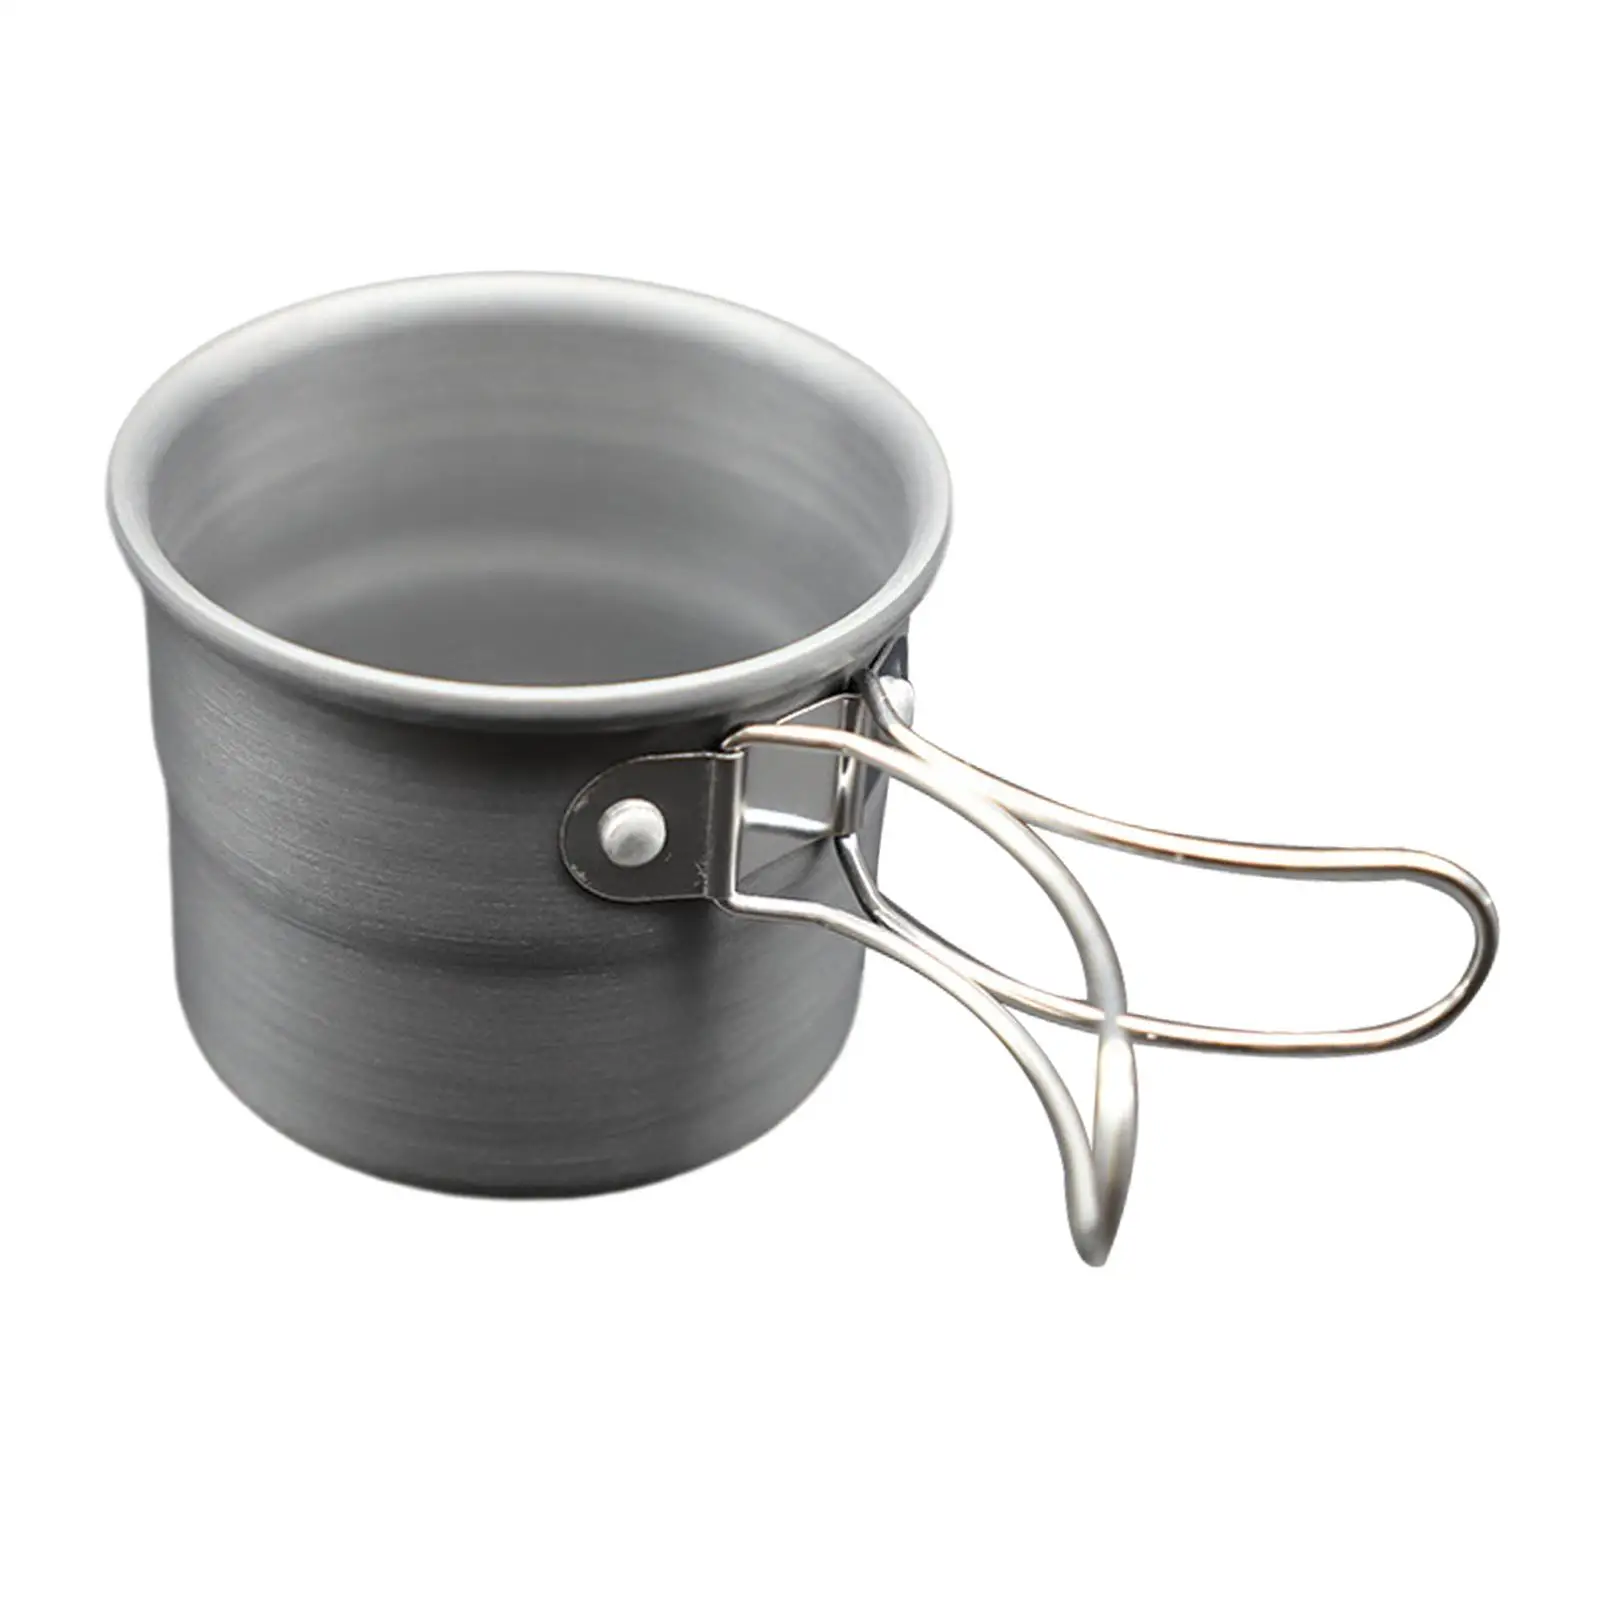 Camping Cup Drinkware Portable Aluminium Tea Water Cup Small for Backpacking